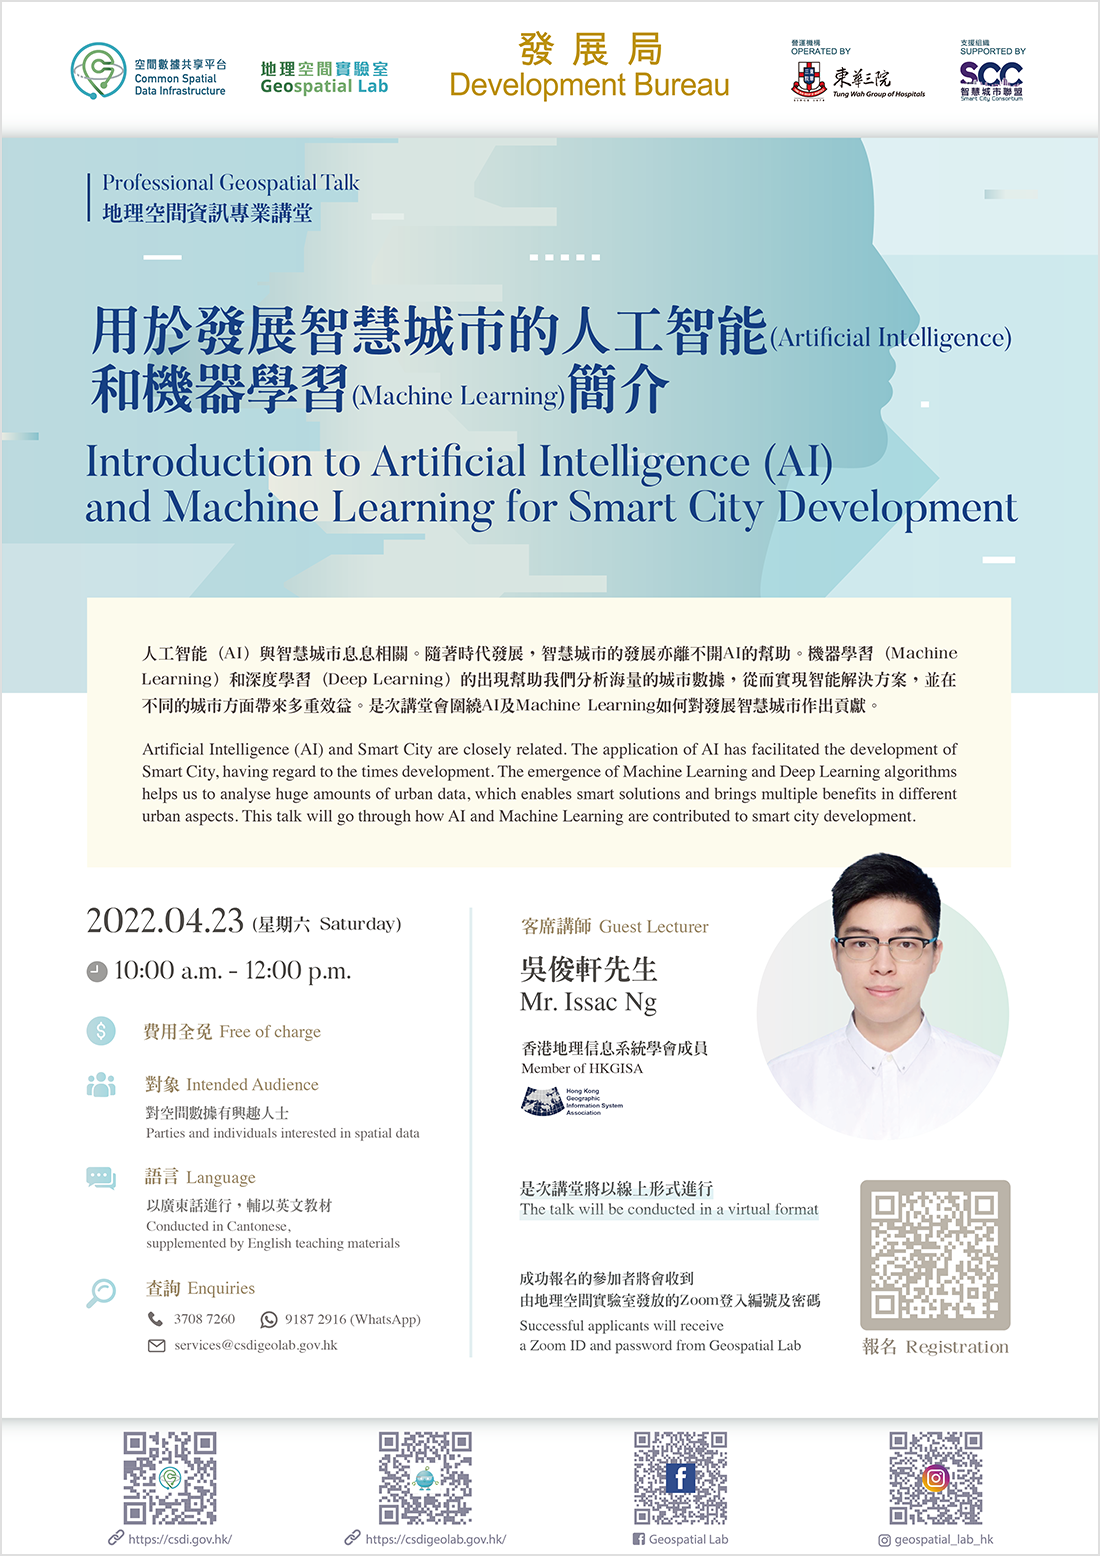 Professional Geospatial Talk - Introduction to Artificial Intelligence (AI) and Machine Learning for Smart City Development